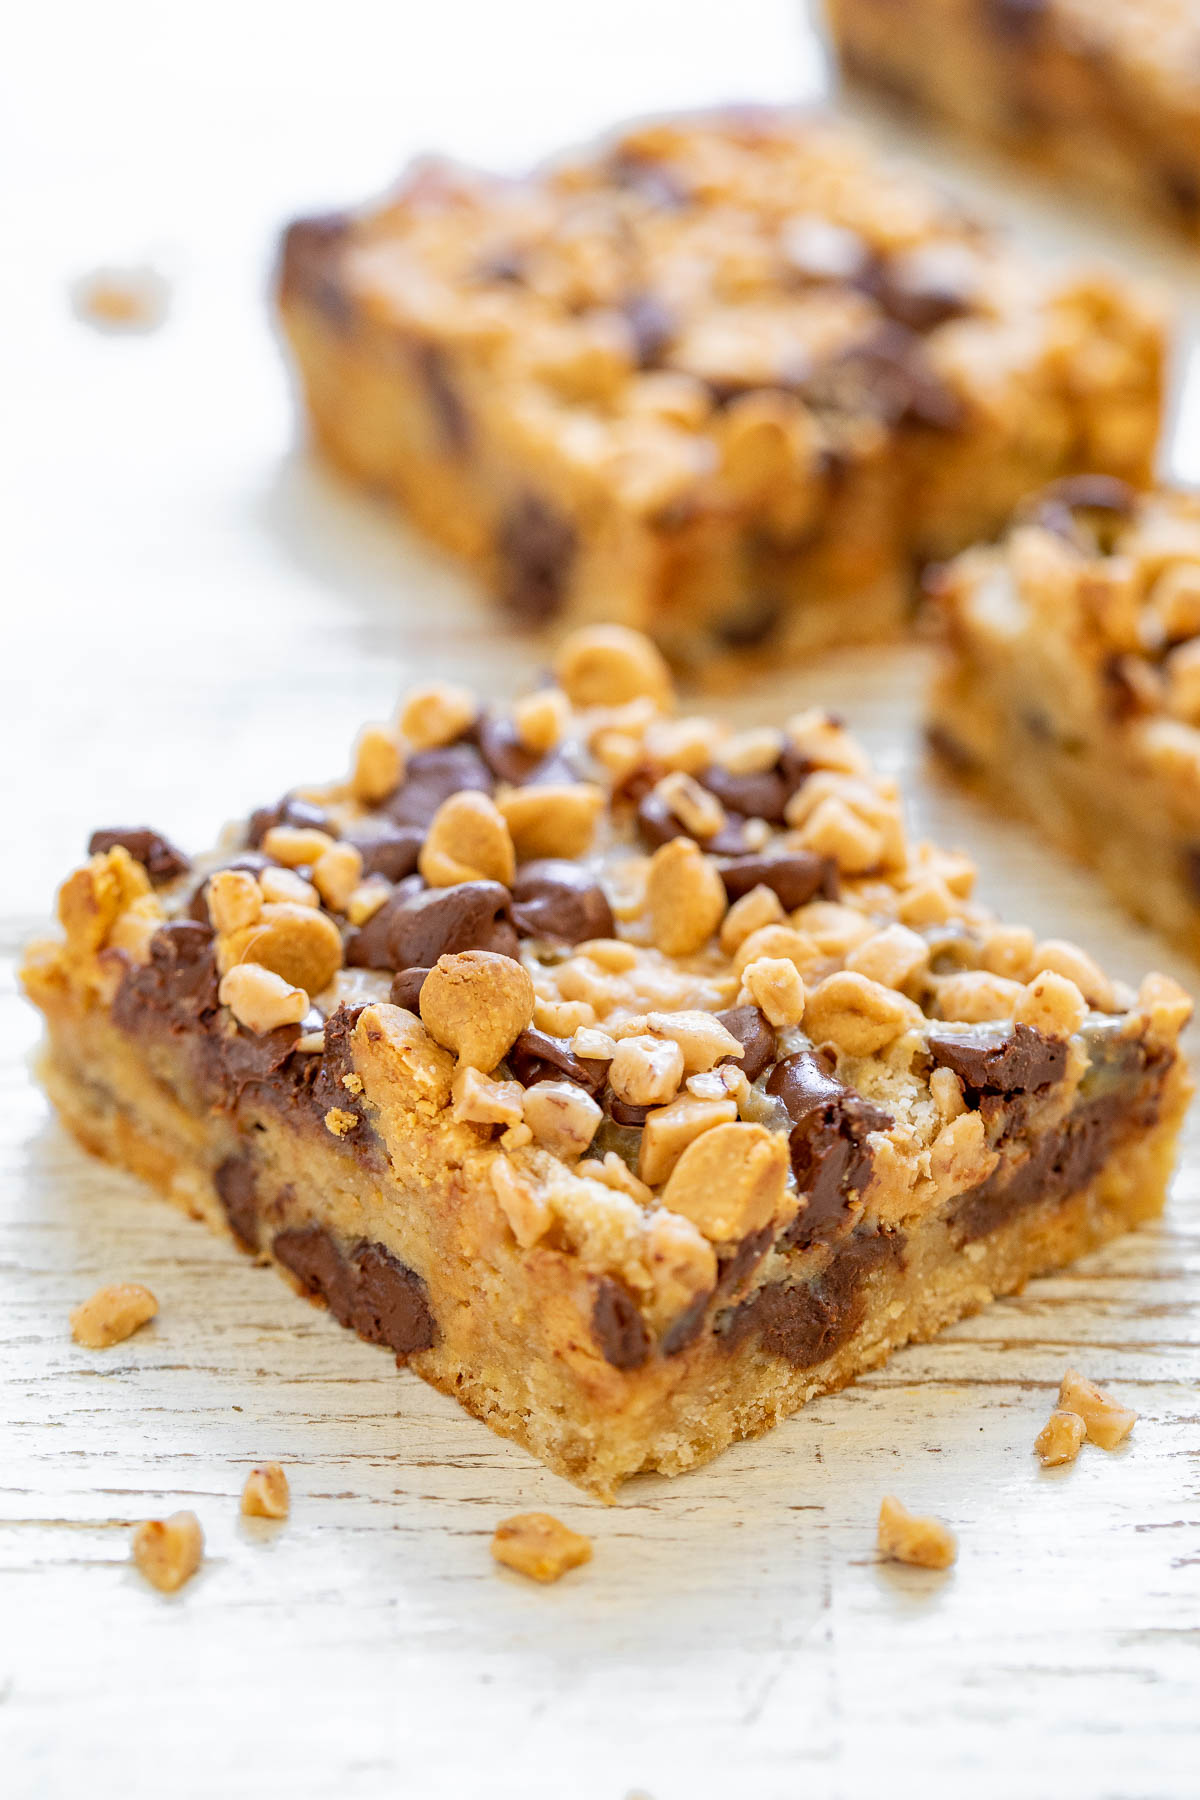 Peanut Butter Chocolate Chip Toffee Bars - Thick, rich, decadent cookie bars made with chocolate chips, peanut butter chips, creamy sweetened condensed milk, and crunchy toffee bits! A FAST and EASY no mixer, one bowl recipe that is sure to impress friends and family! The bars also keep fresh for a long time and are a great make-ahead dessert or great for gifting.